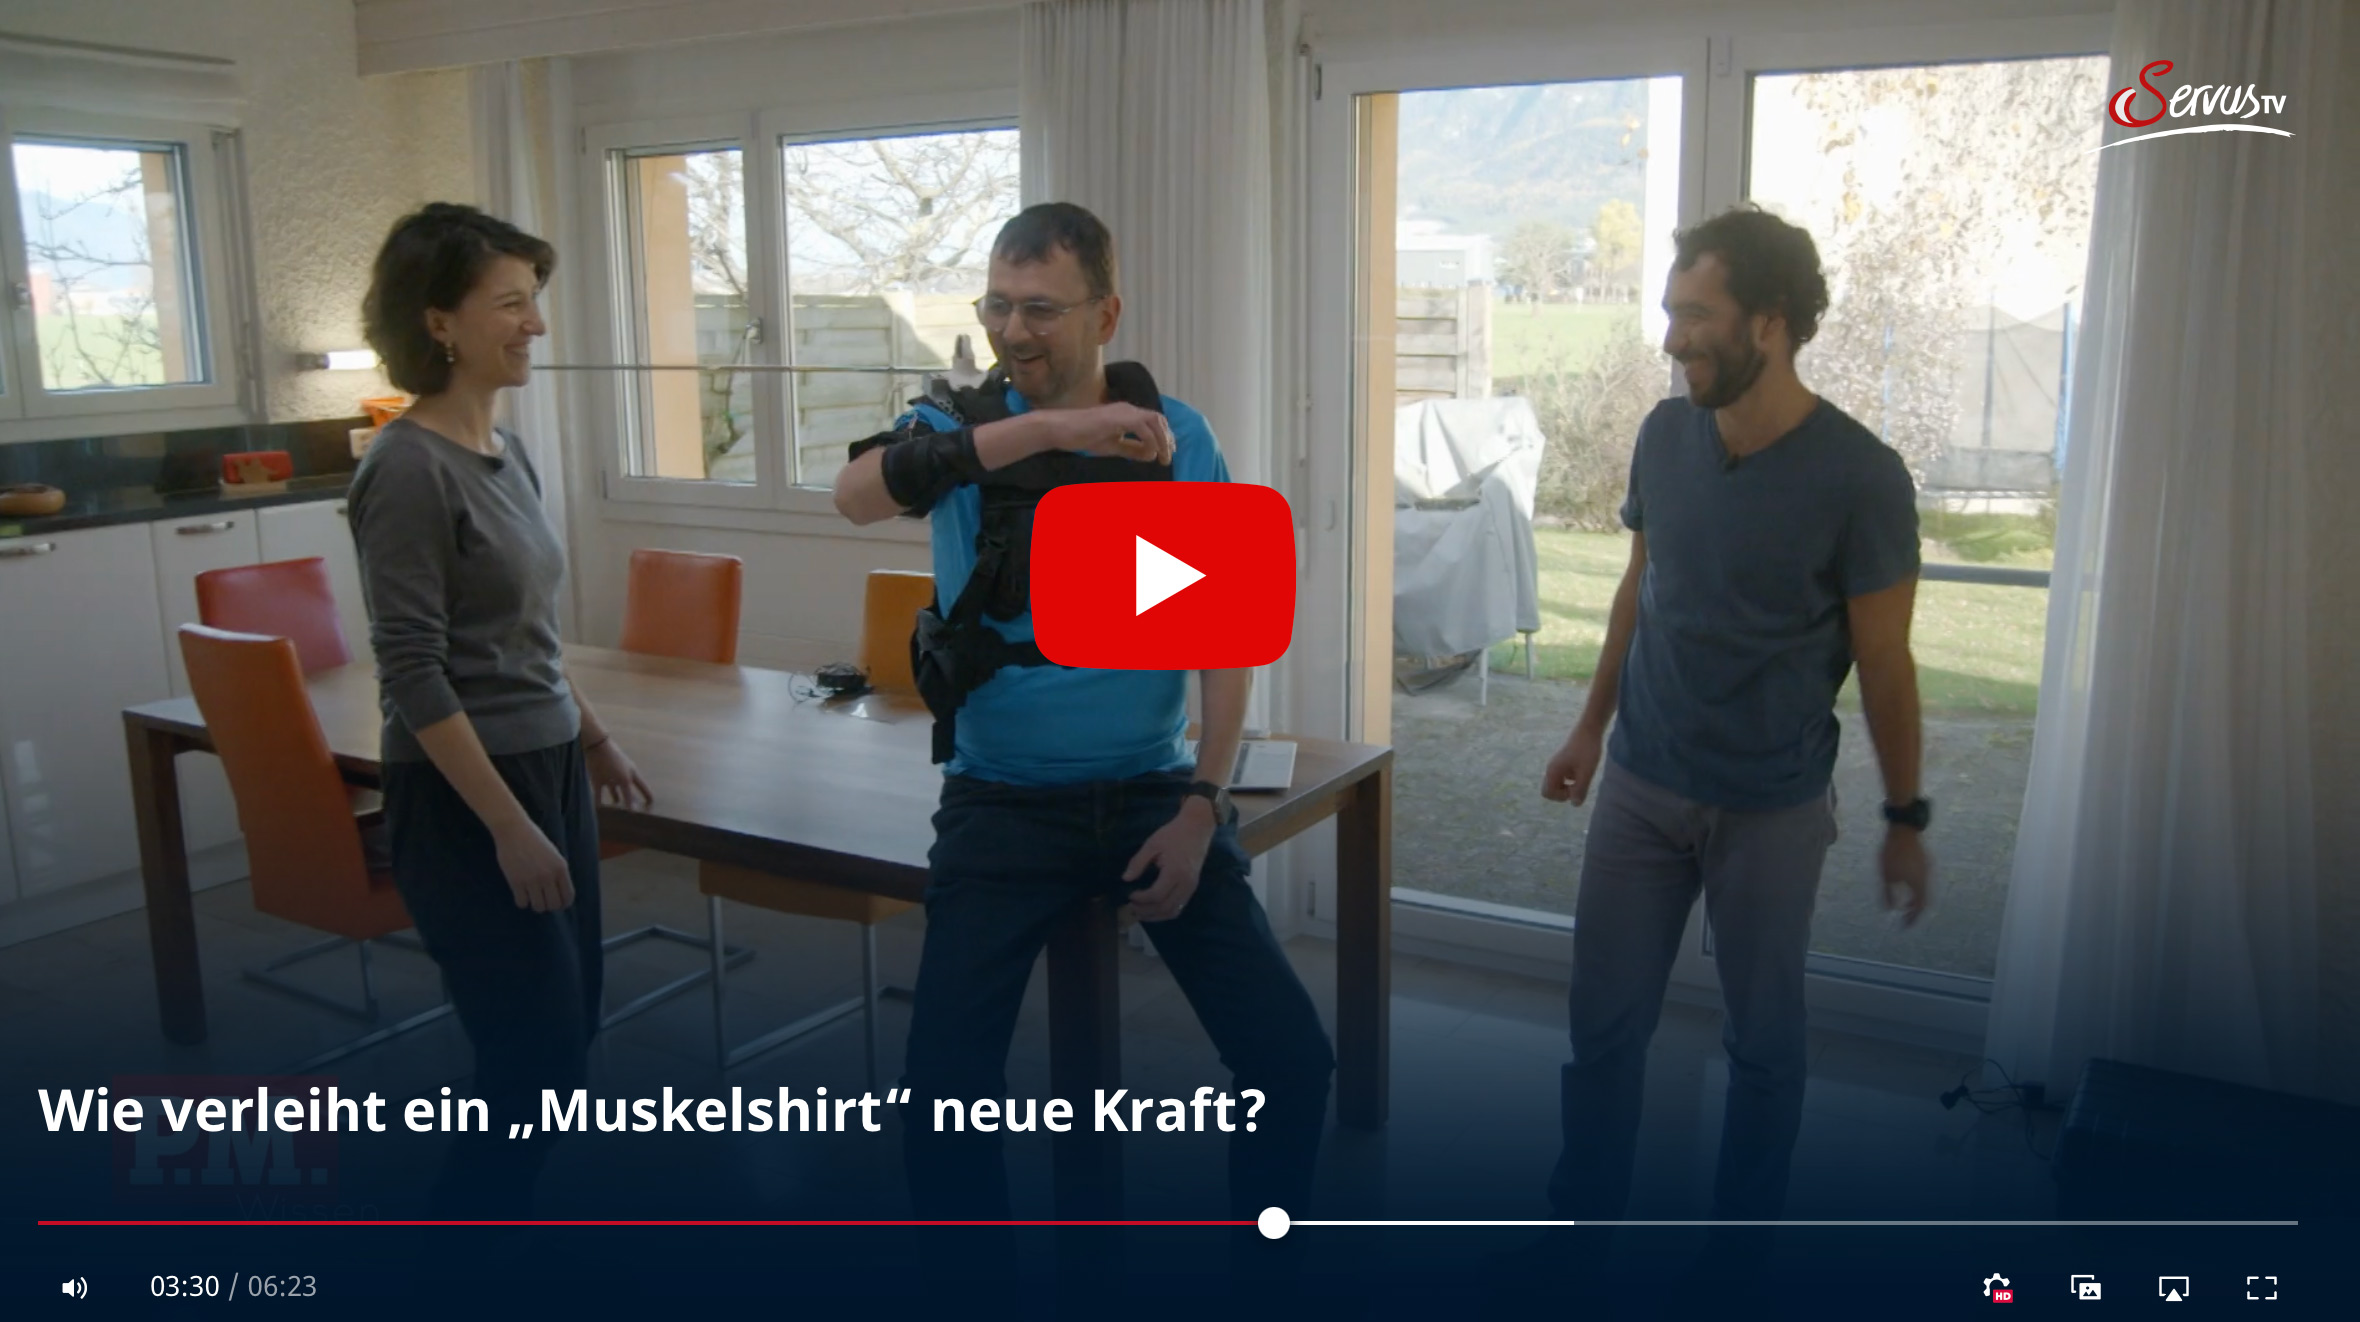 Screensot from the movie about Myoshirt on Servus TV